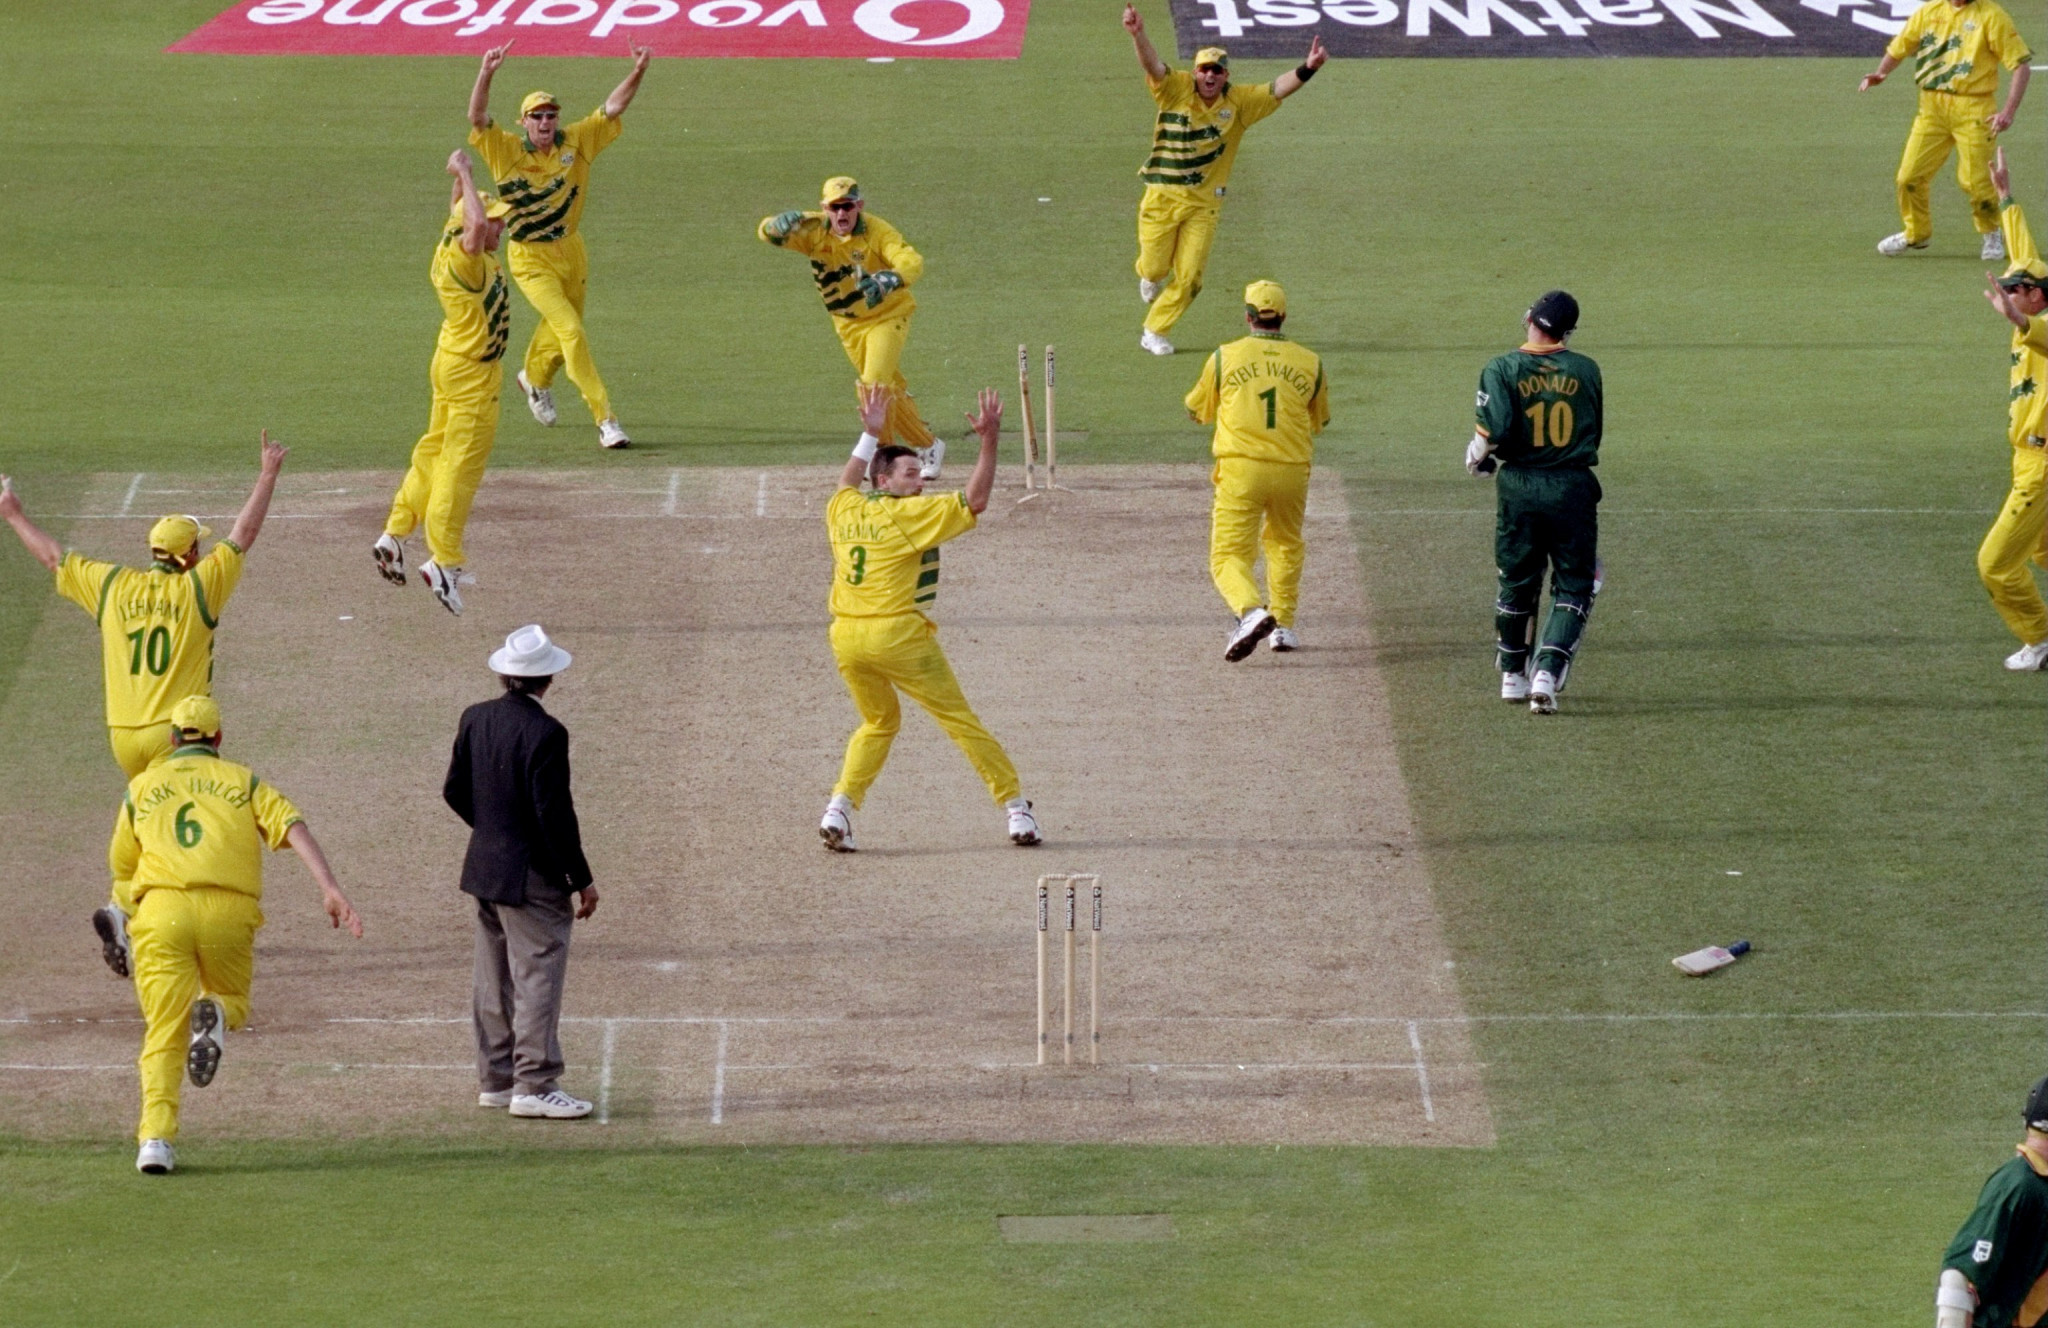 Jubilation for the Australians after Allan Donald of South Africa was run out in the 1999 semi-final. The match was tied but Australia went through to the final by virtue of their superior record in the earlier matches ©Getty Images